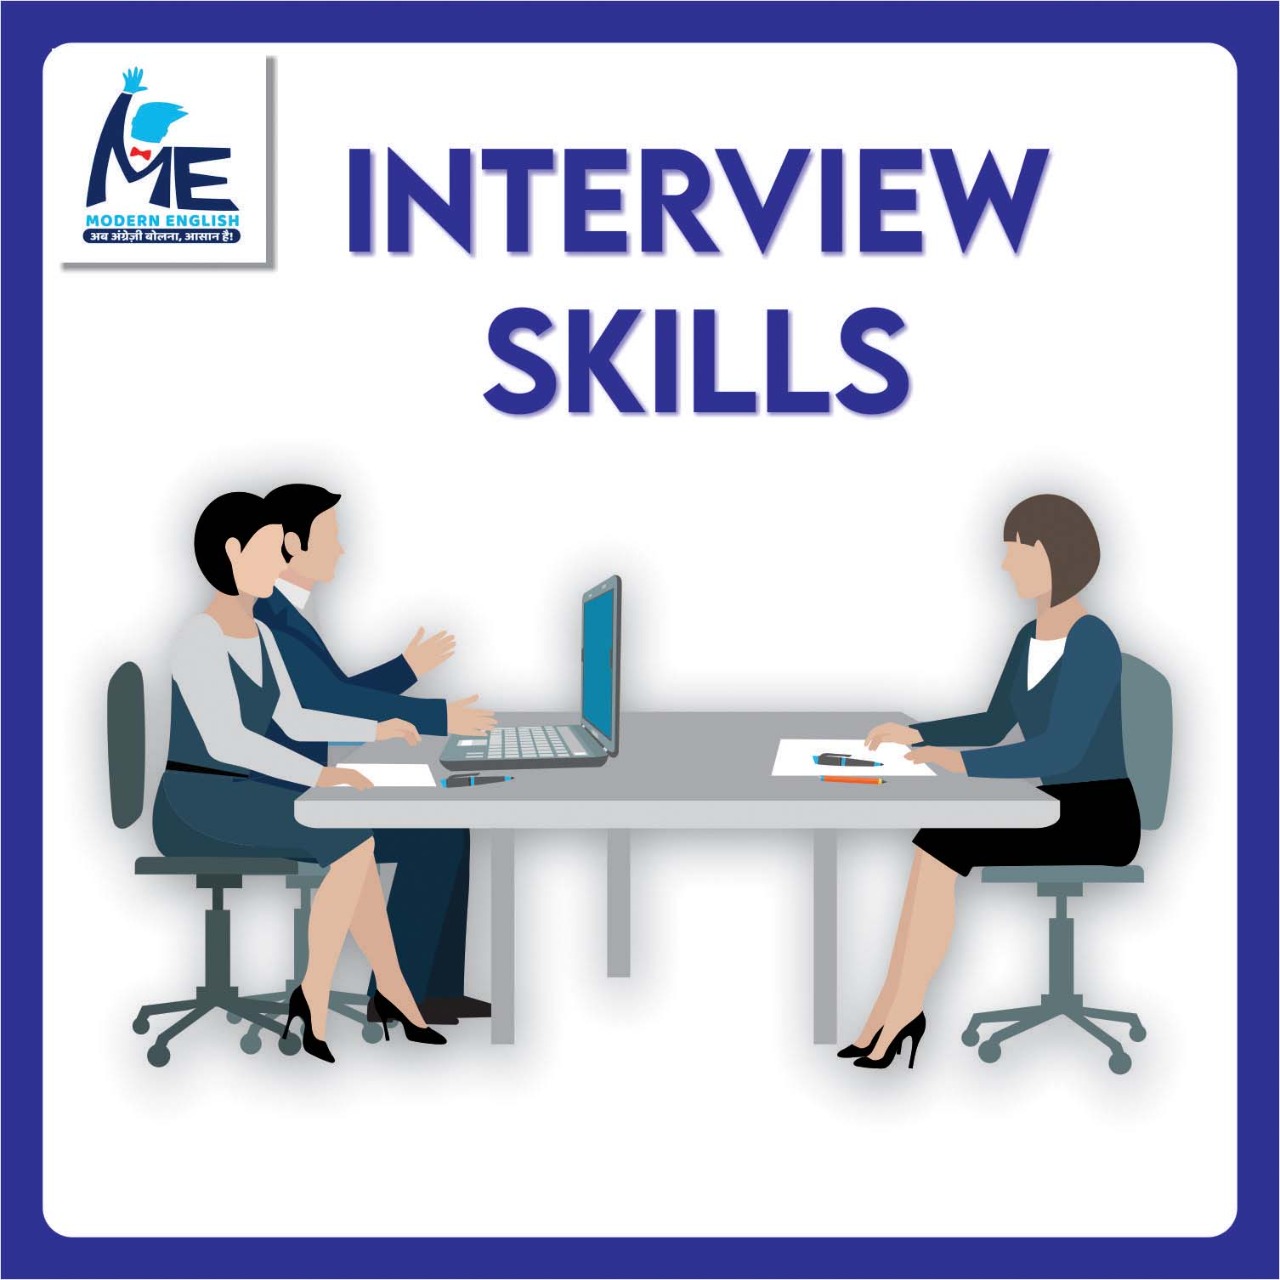 Looking to ace your next job interview? Look no further than the JOB Interview Training Institute at Modern English Institute in Bhopal! Our expert trainers will equip you with the skills and confidence you need to land your dream job. Enroll today & start your journey towards professional success.